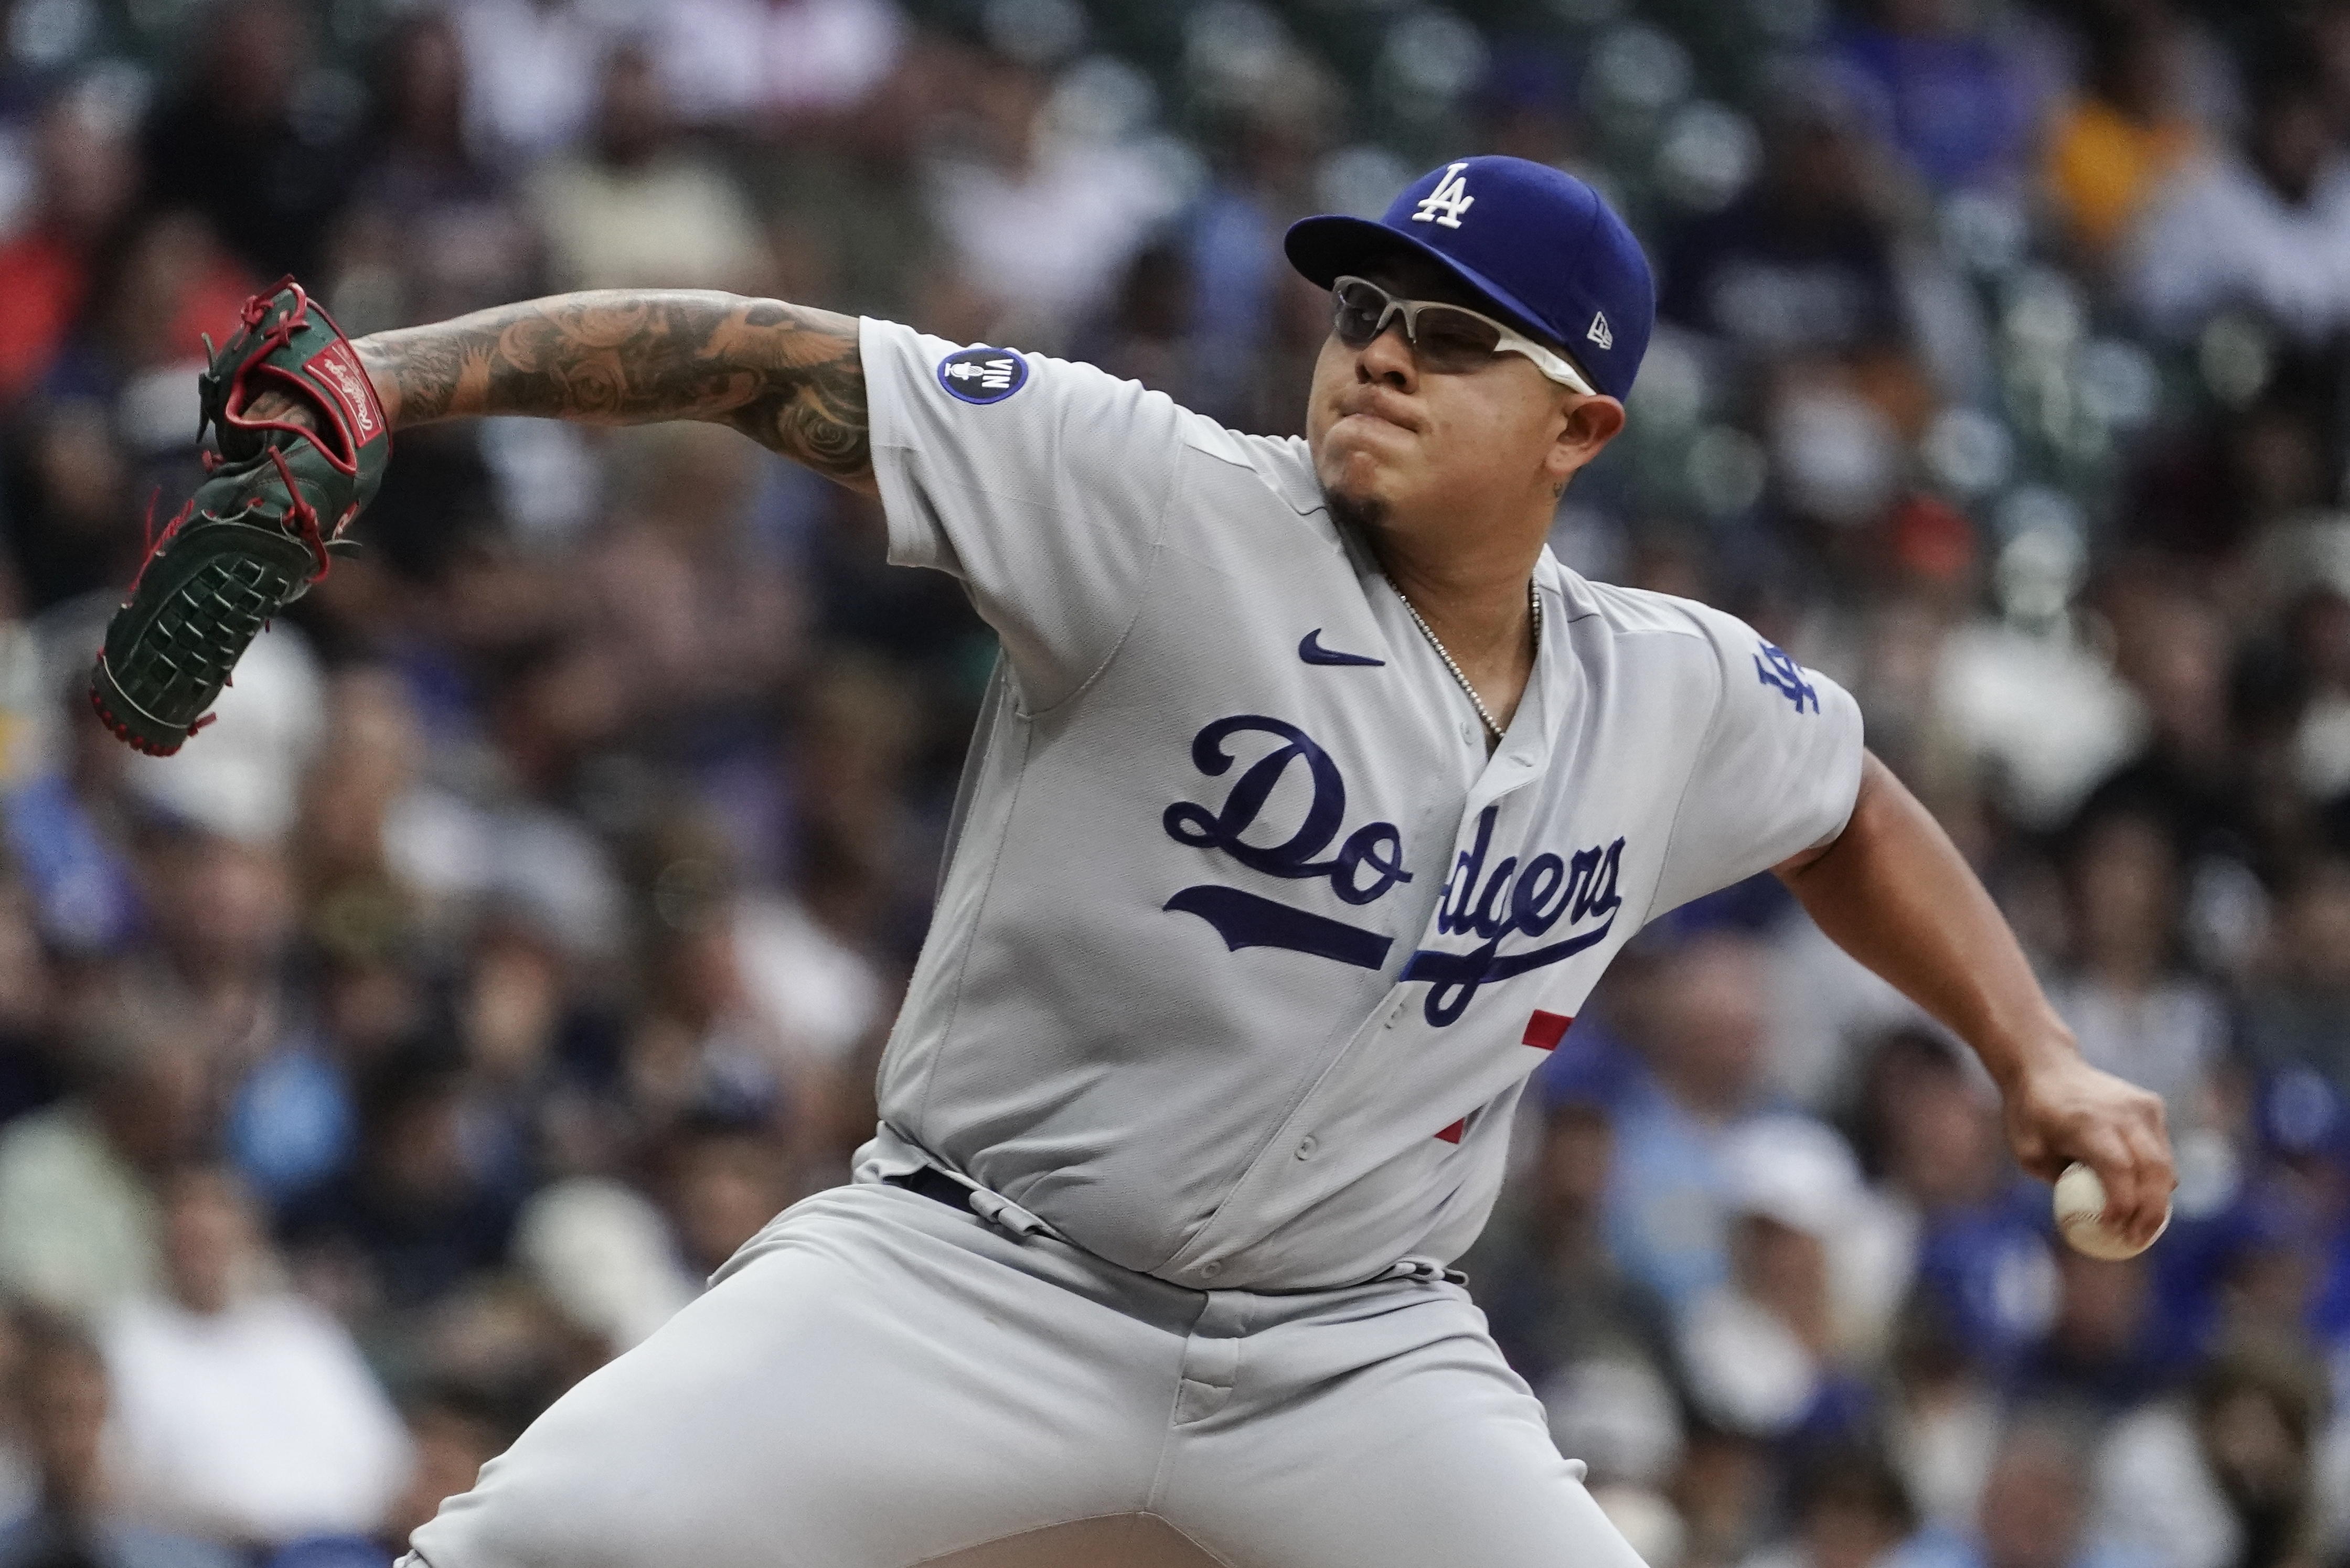 Dodgers RHP Dustin May to have season-ending elbow surgery